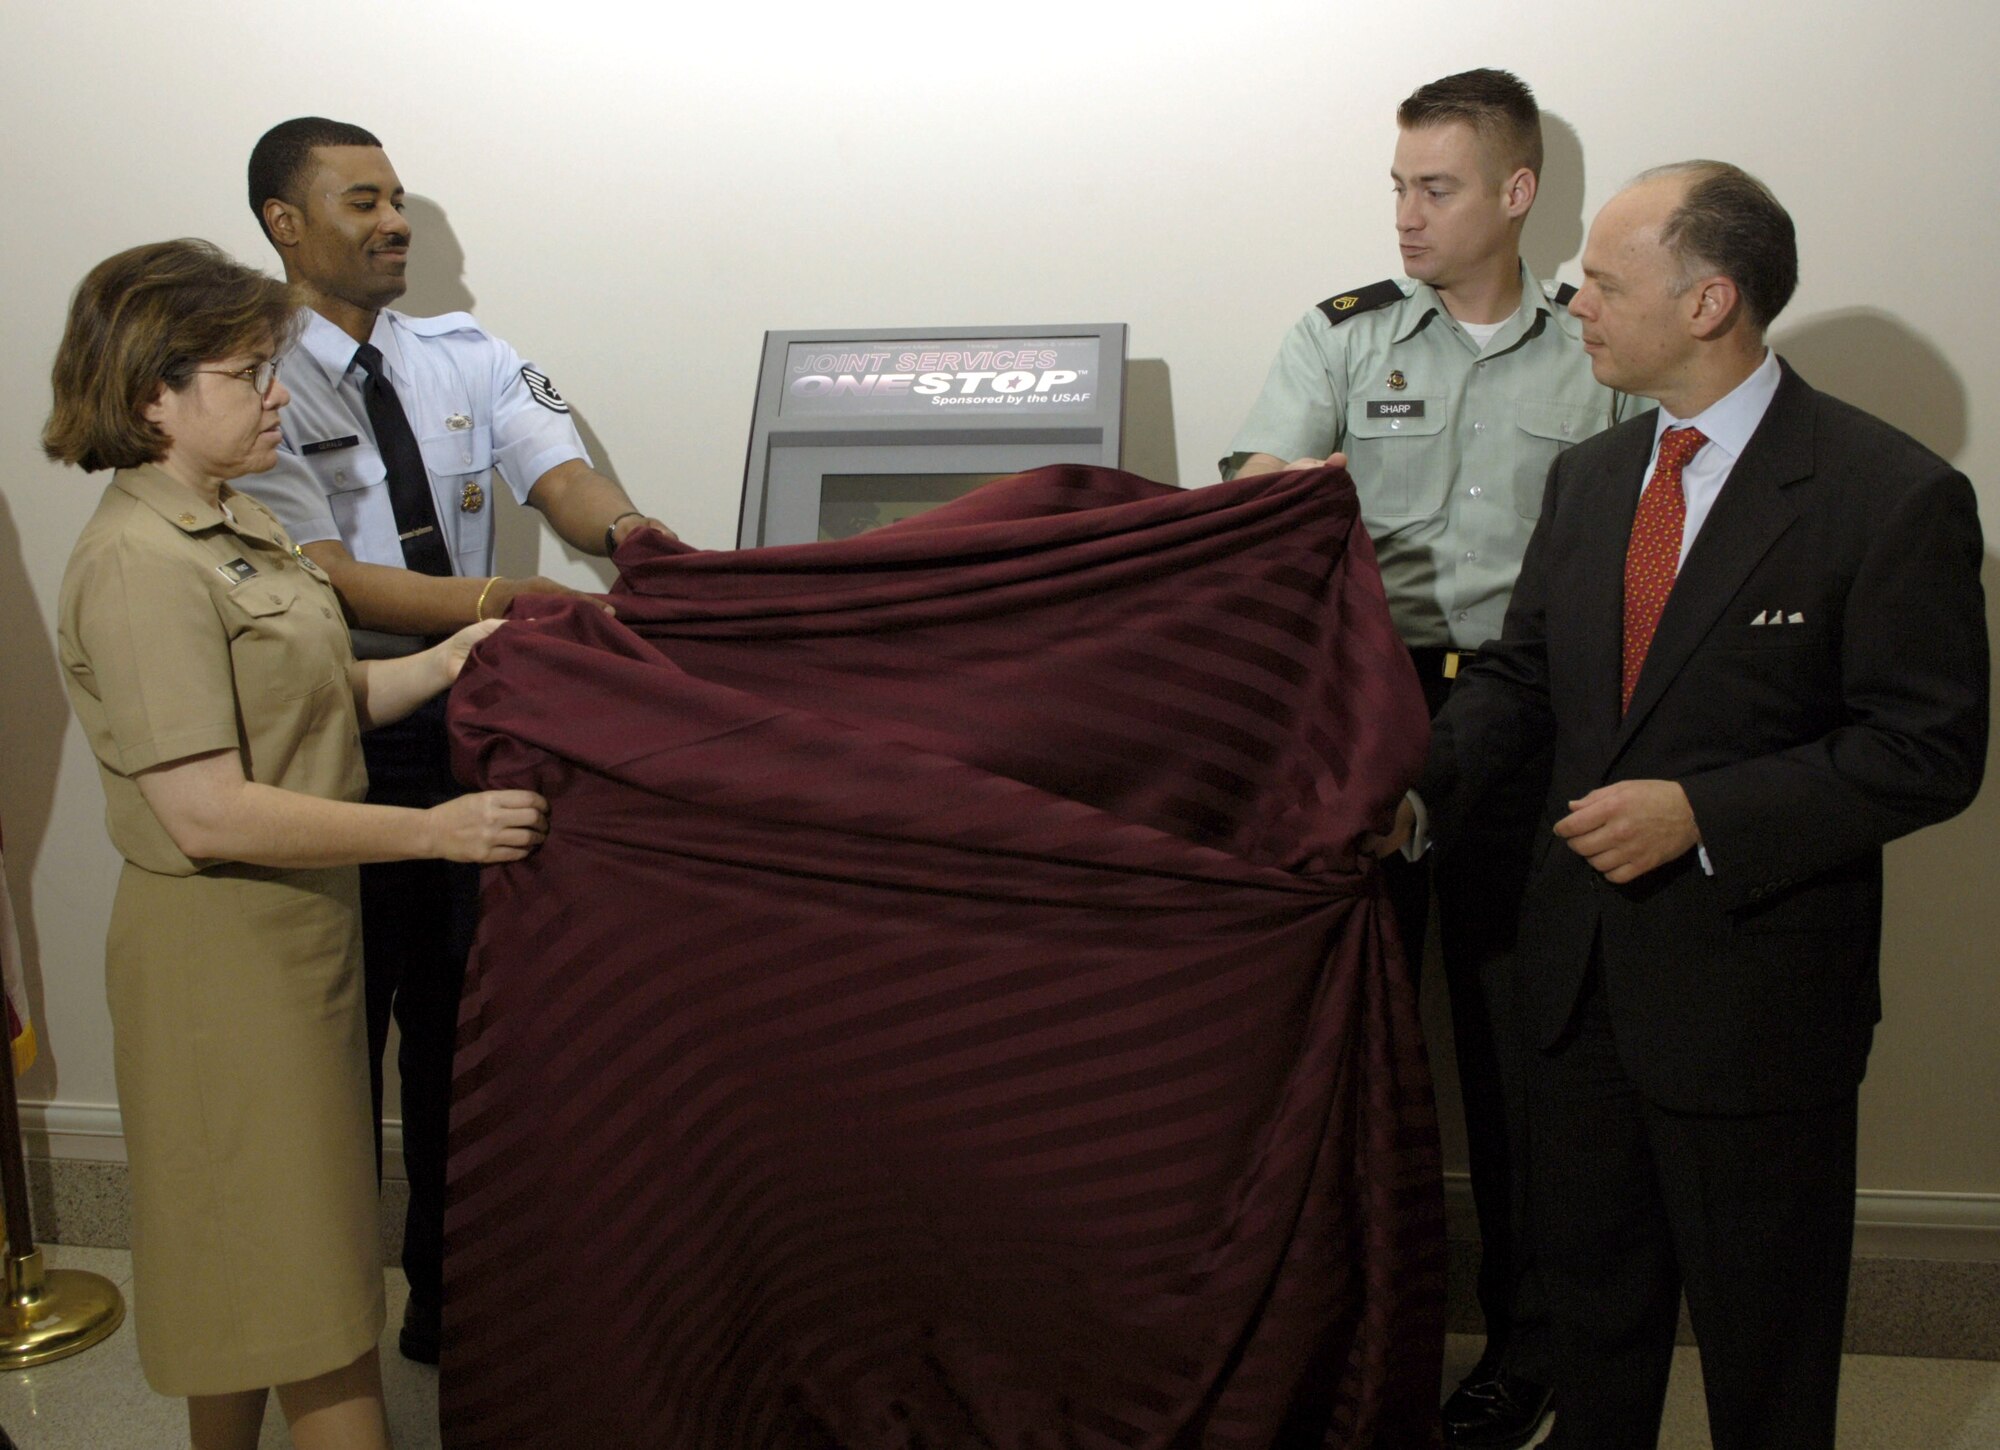 (From left) Navy Chief Petty Officer Jana Perez, Tech. Sgt. Timothy Gerald and Army Staff Sgt. Lonny Sharp unveil the new Joint Services OneStop Kiosk at the Pentagon on Thursday, June 29, with John Vonglis, principal deputy assistant secretary of the Air Force for financial management. (U.S. Air Force photo/Tech. Sgt. Cohen A. Young)